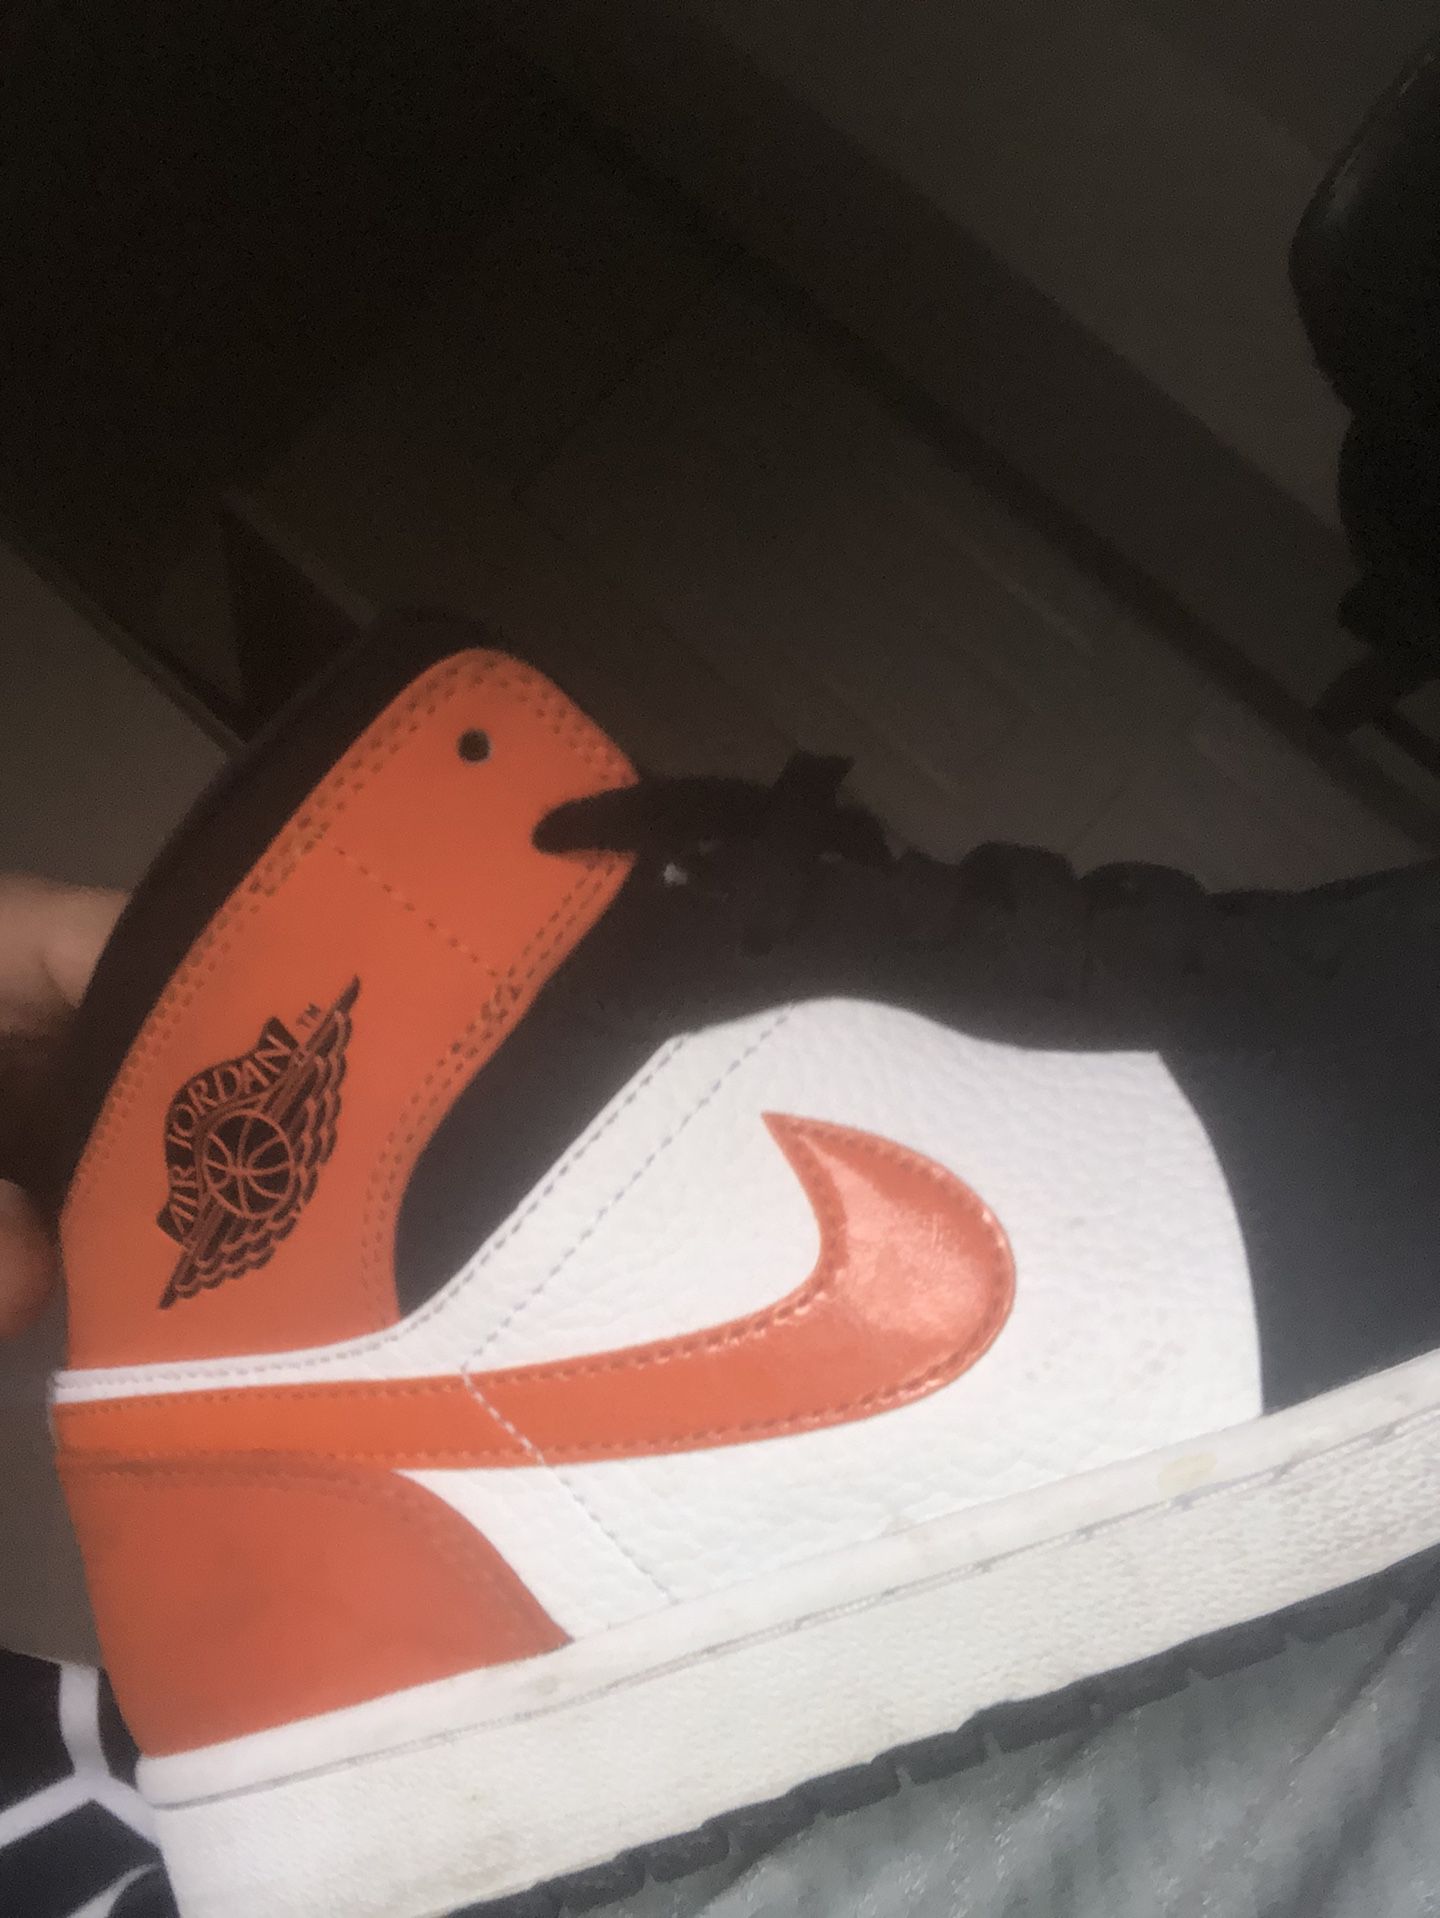 Nike Jordan 1s VND 9/10 only wore twice